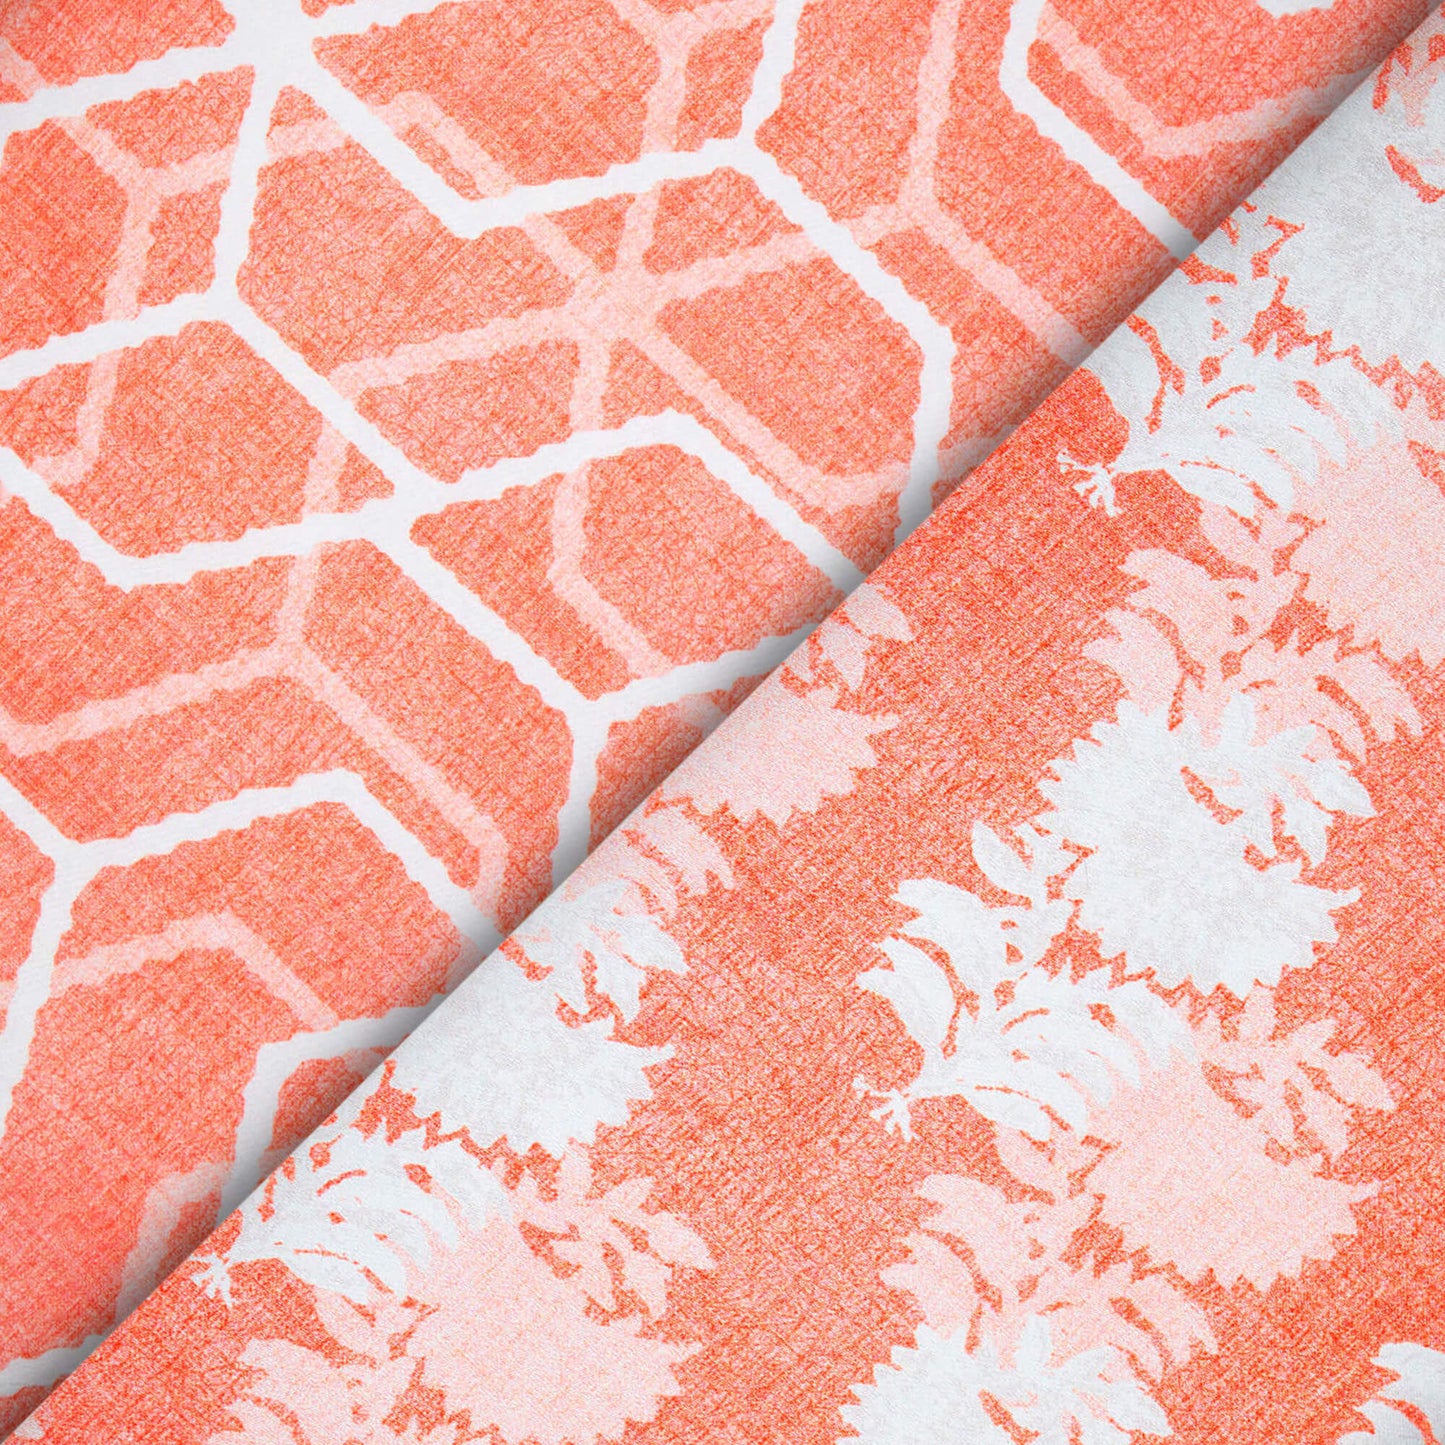 Coral Peach And White Floral Pattern Digital Print Japan Satin Fabric